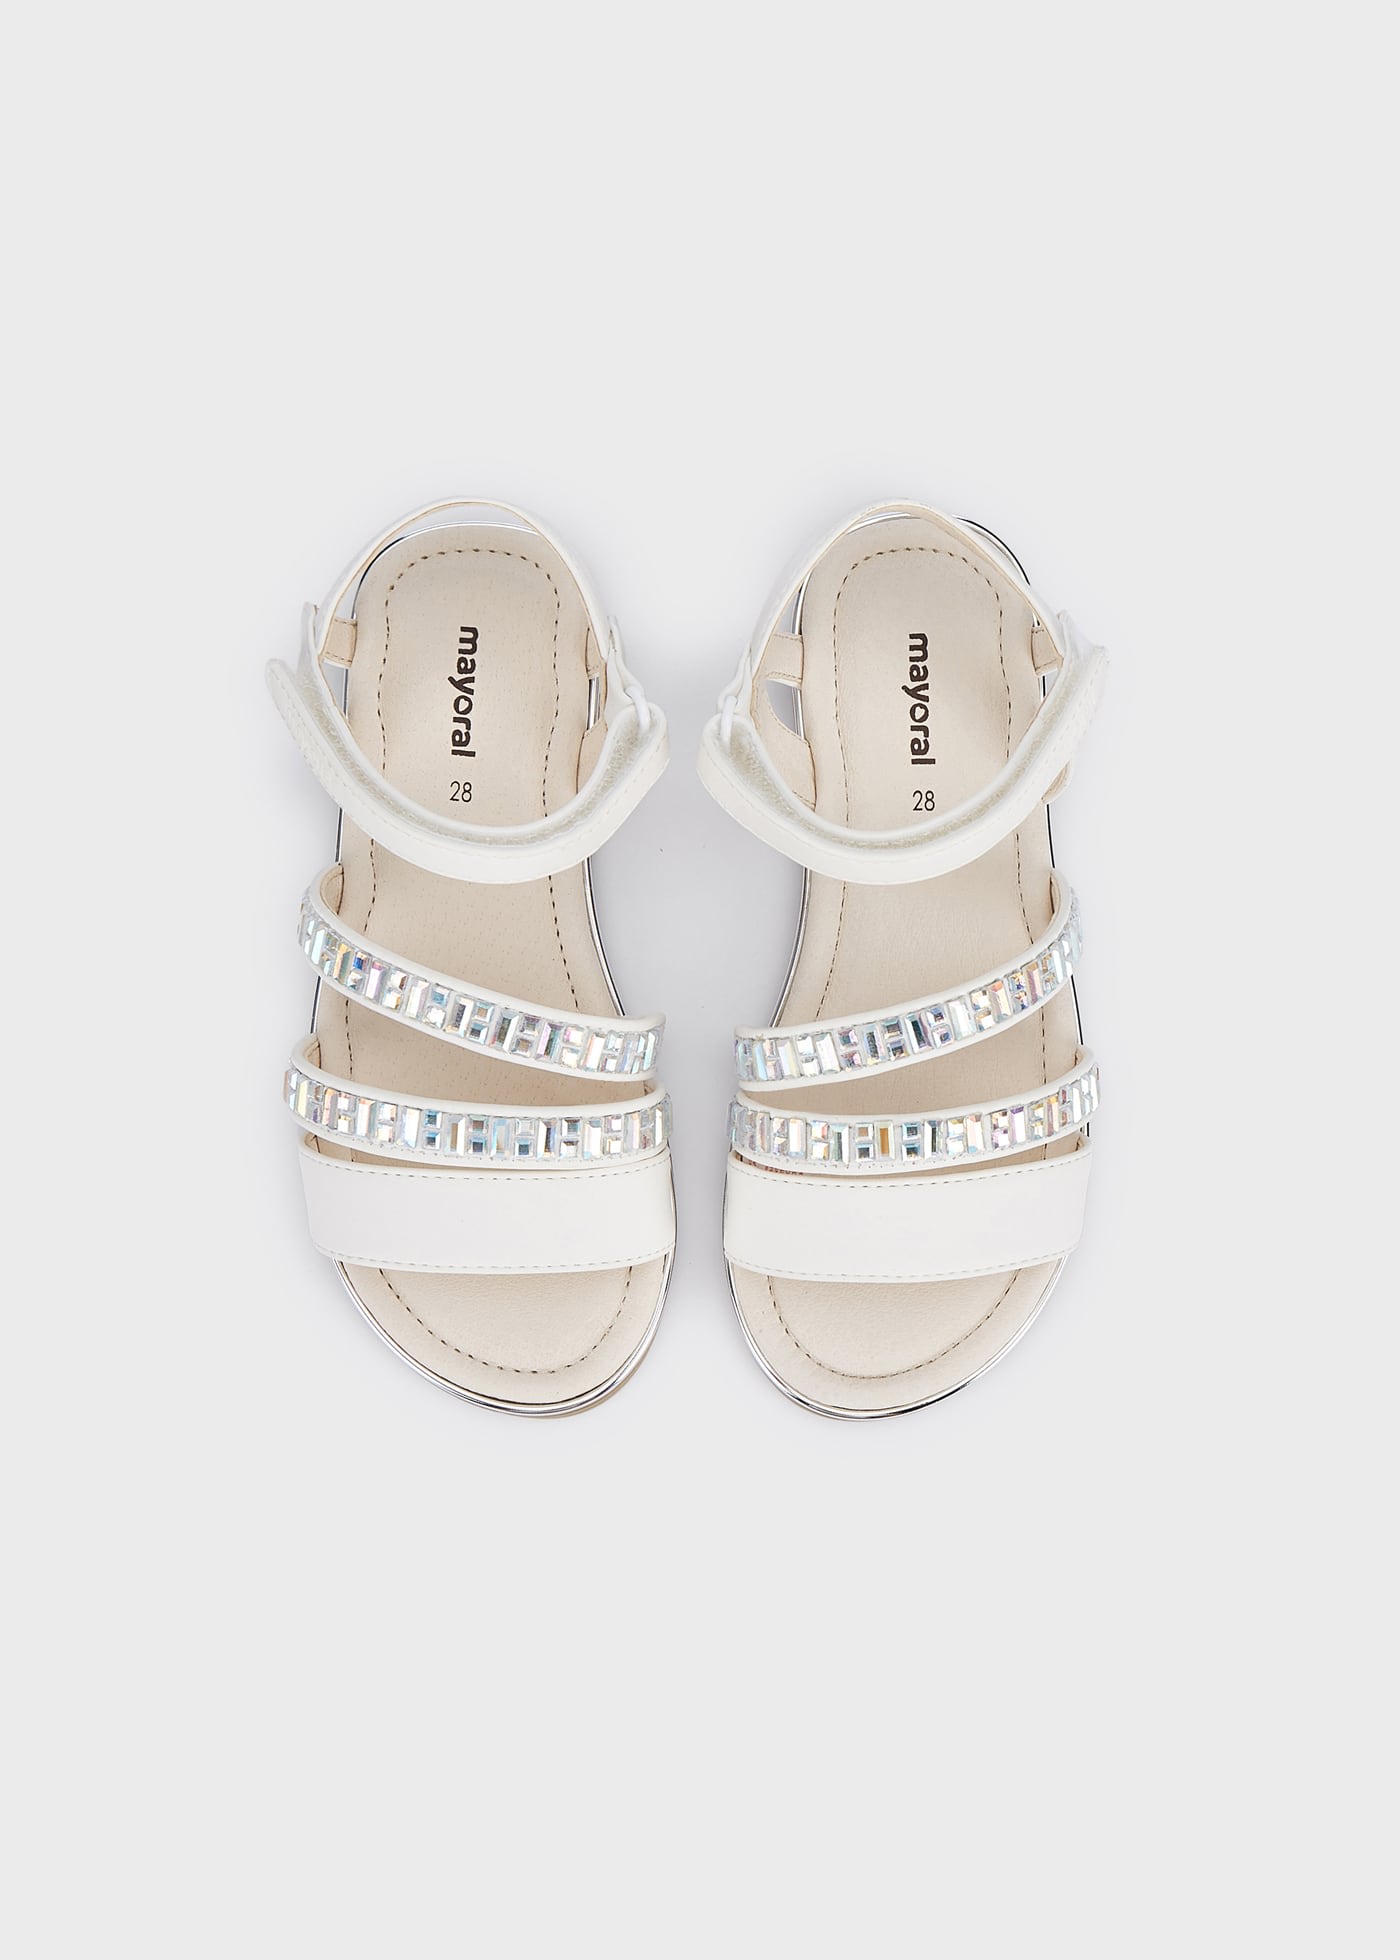 Shinny sandals with velcro girl